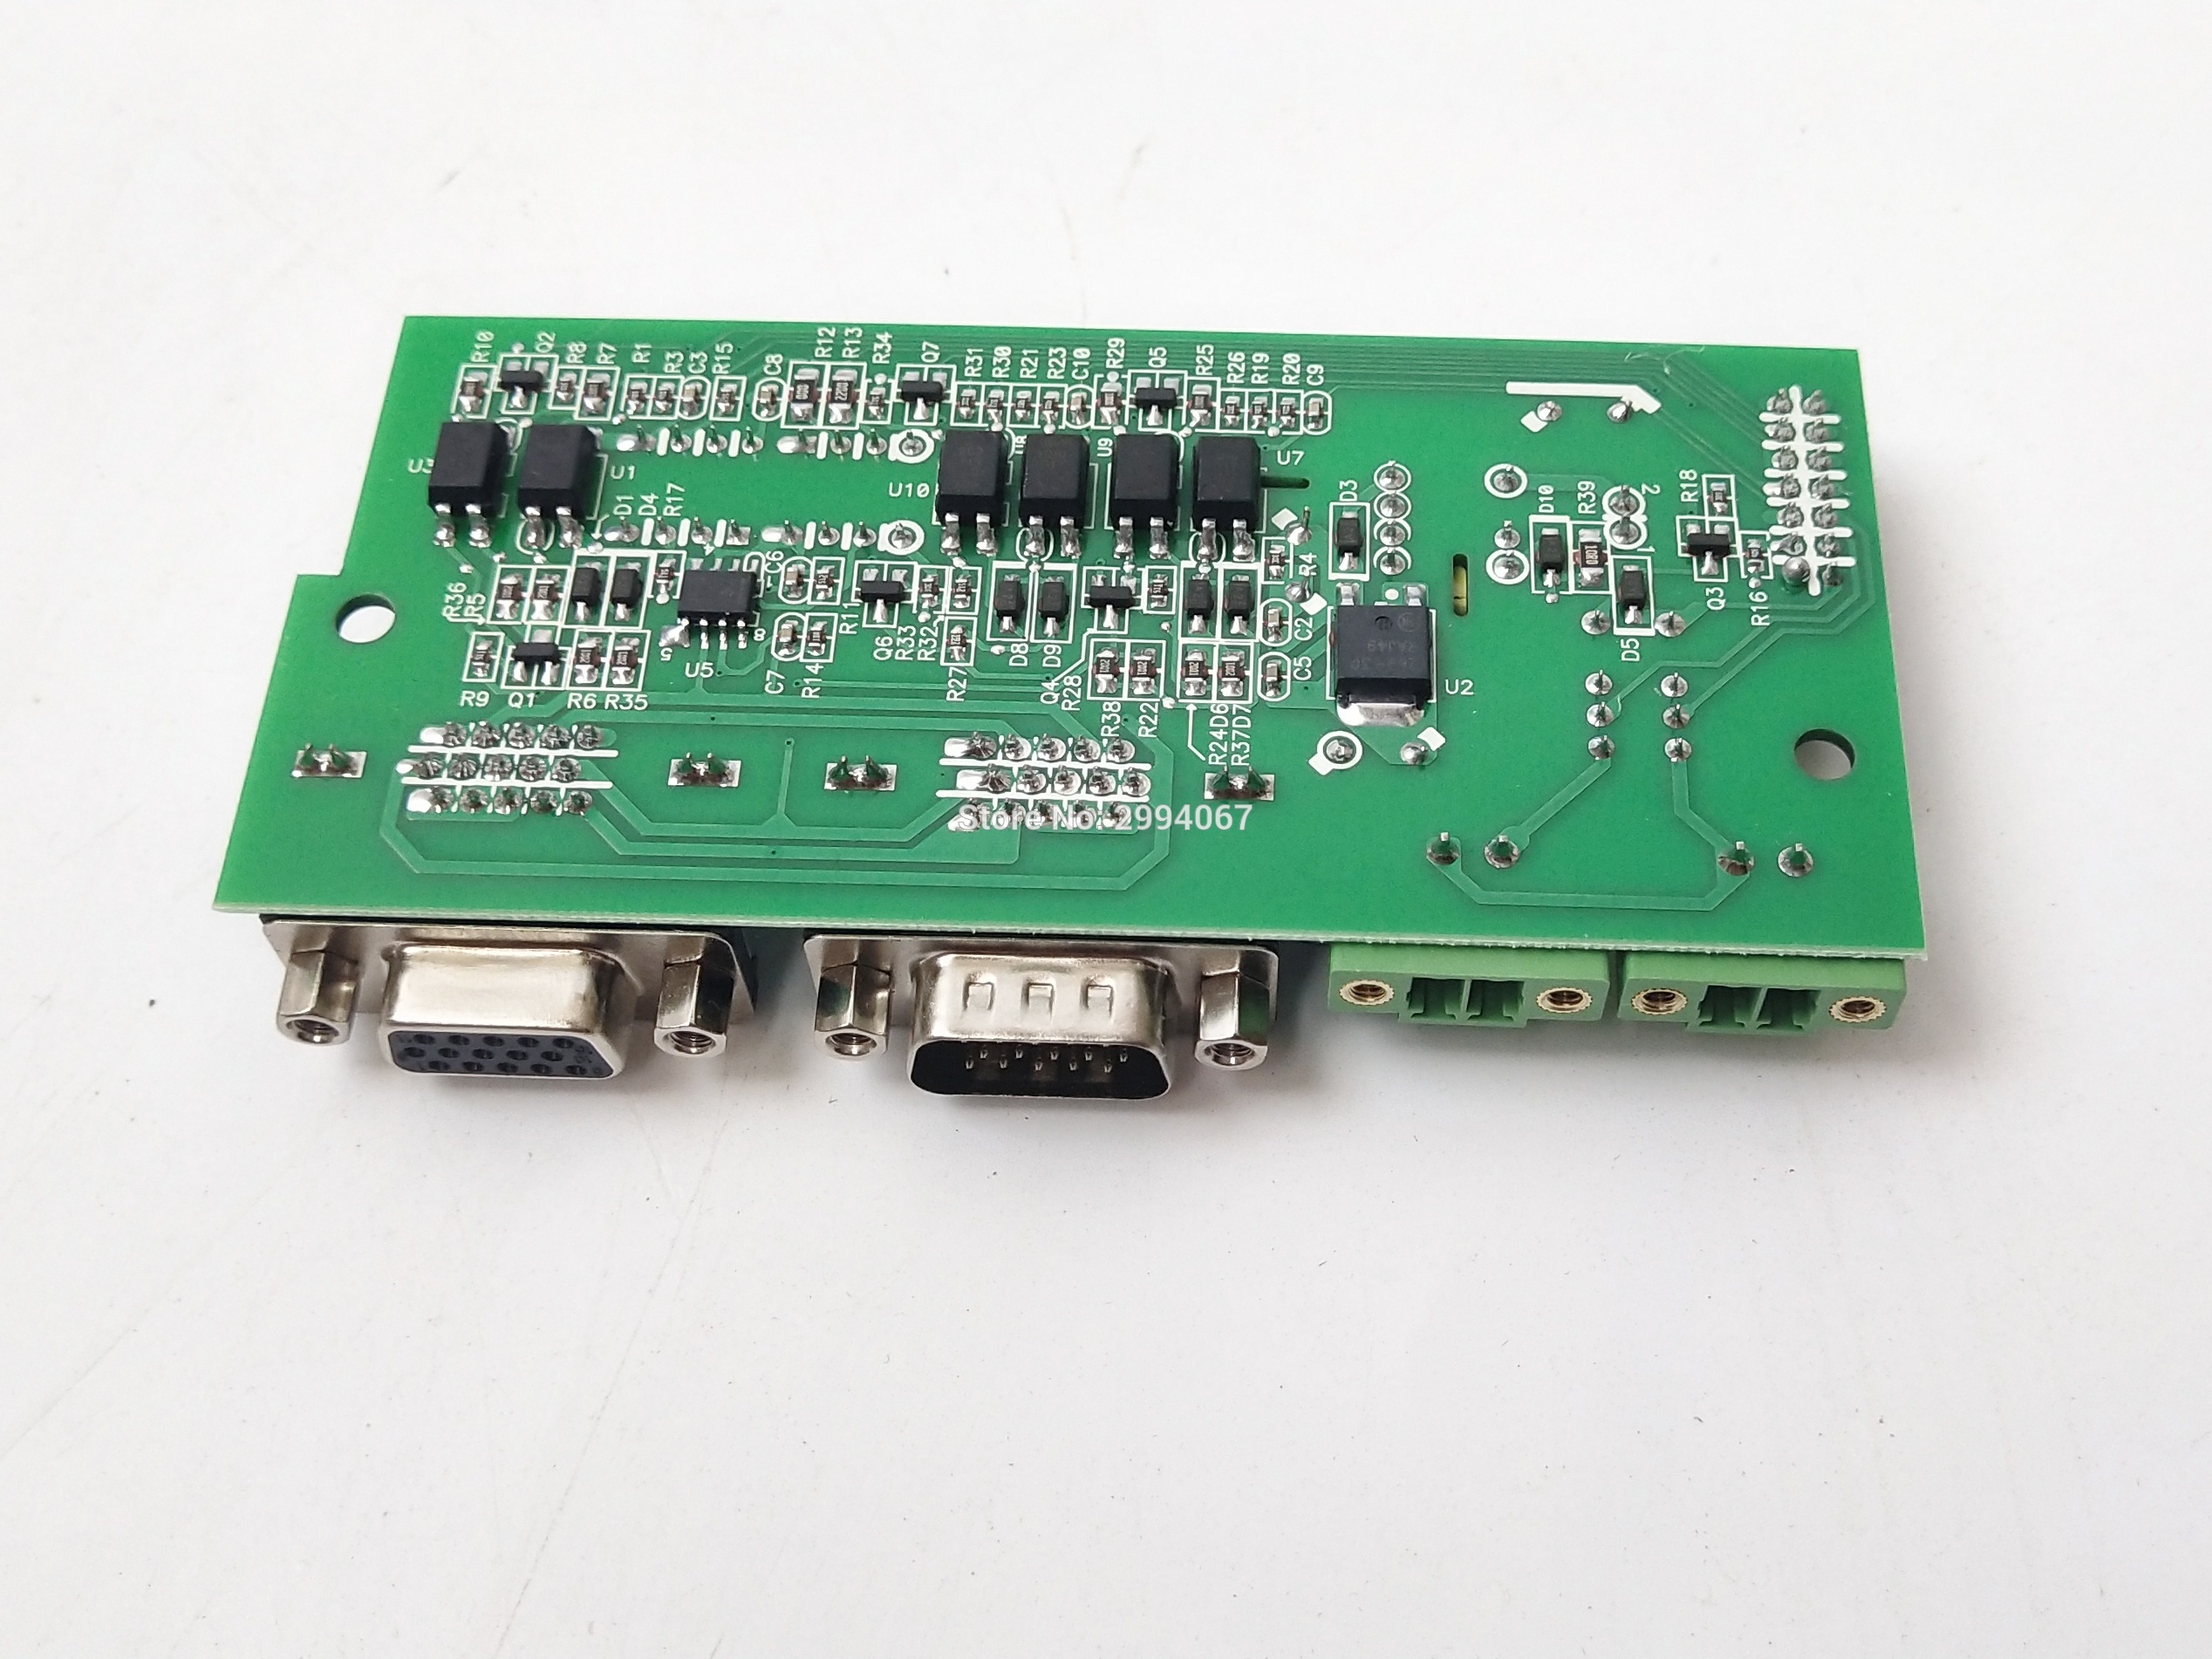 Parallel Card for Parallel Pcb Board for Off Grid Solar inverter PS/MPS 4KVA 5KVA Parallel Communication Cable